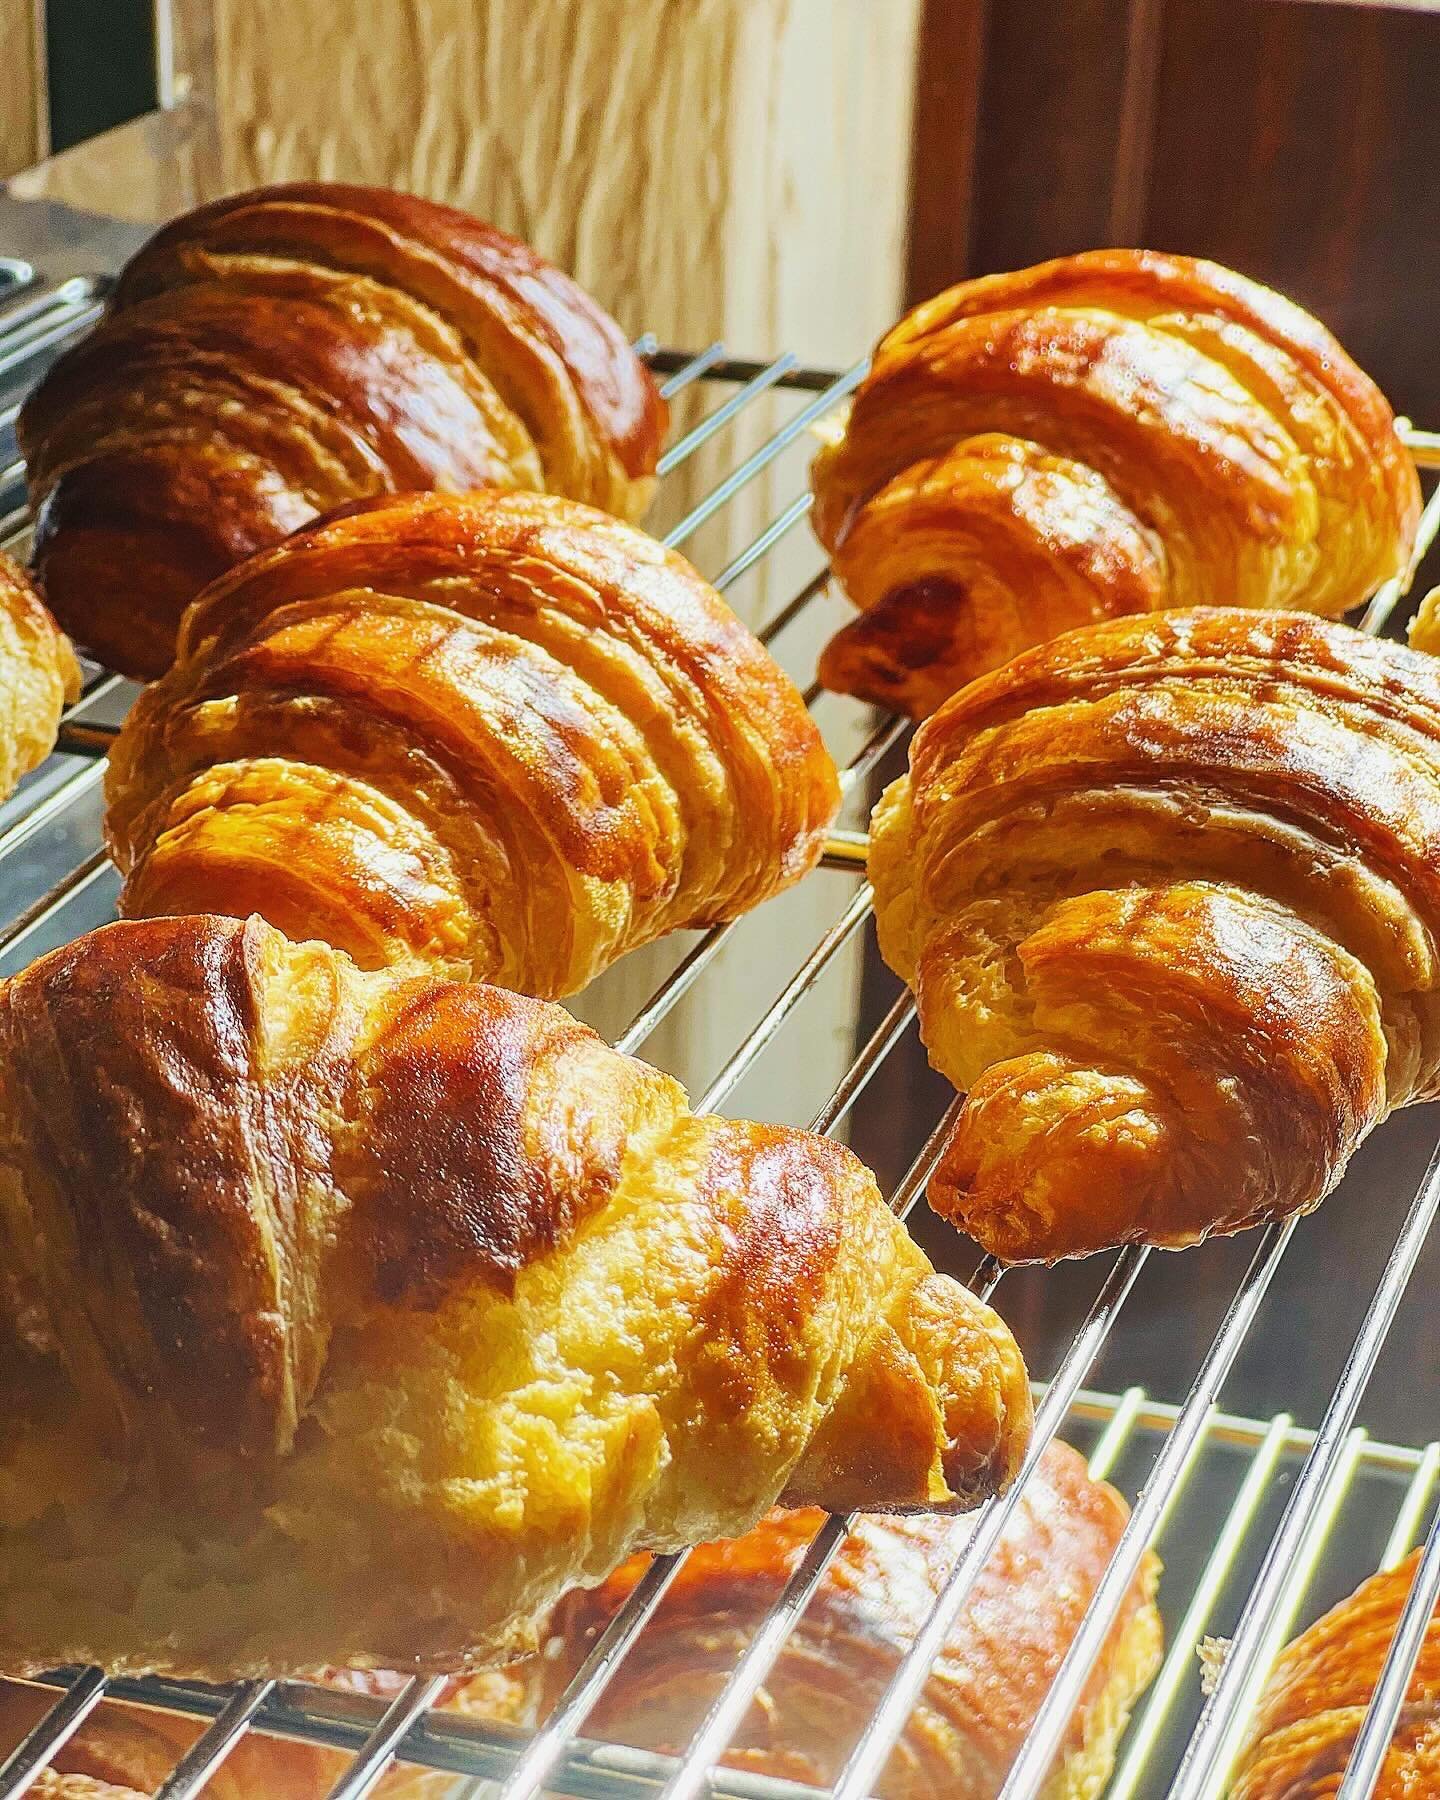 Croissant &amp; Pain au Chocolat glistening in the ☀️
#ourlifeatthebarn #barnbakes #frenchpastries #morningpastry #artisanpastry